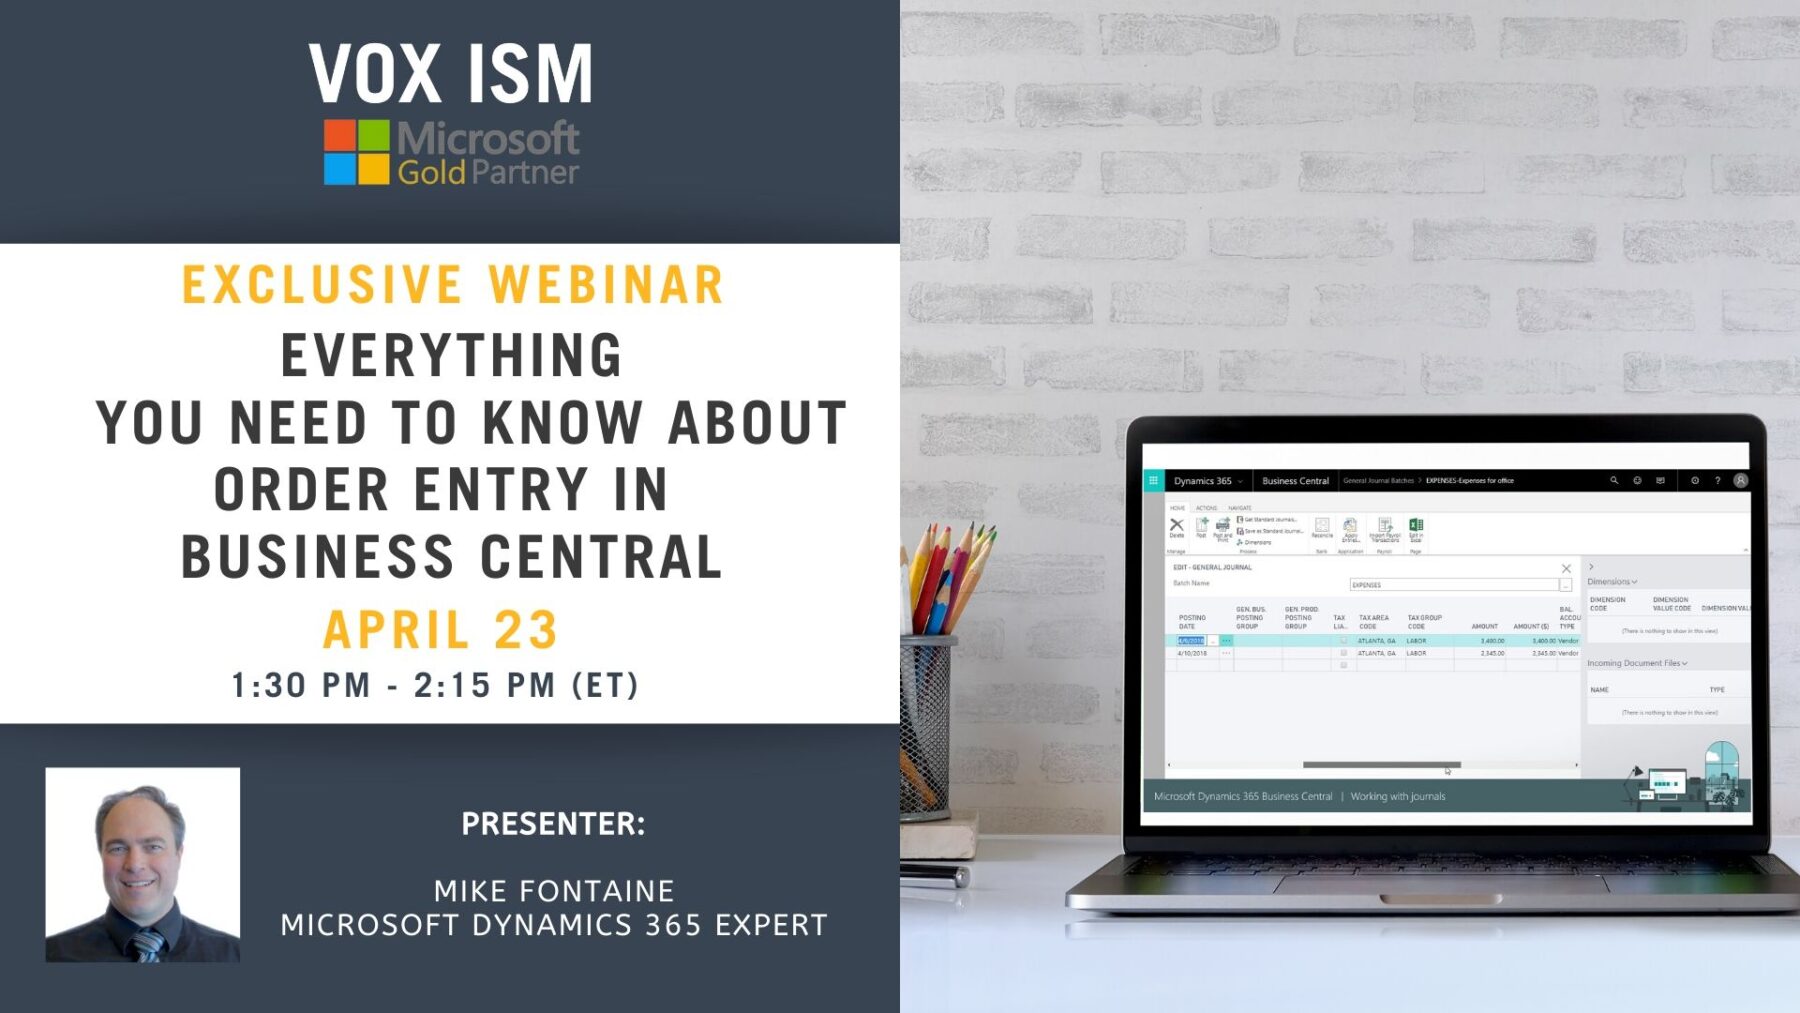 Everything You Need to Know About Order Entry in Business Central - April 23 - Webinar_VOX ISM